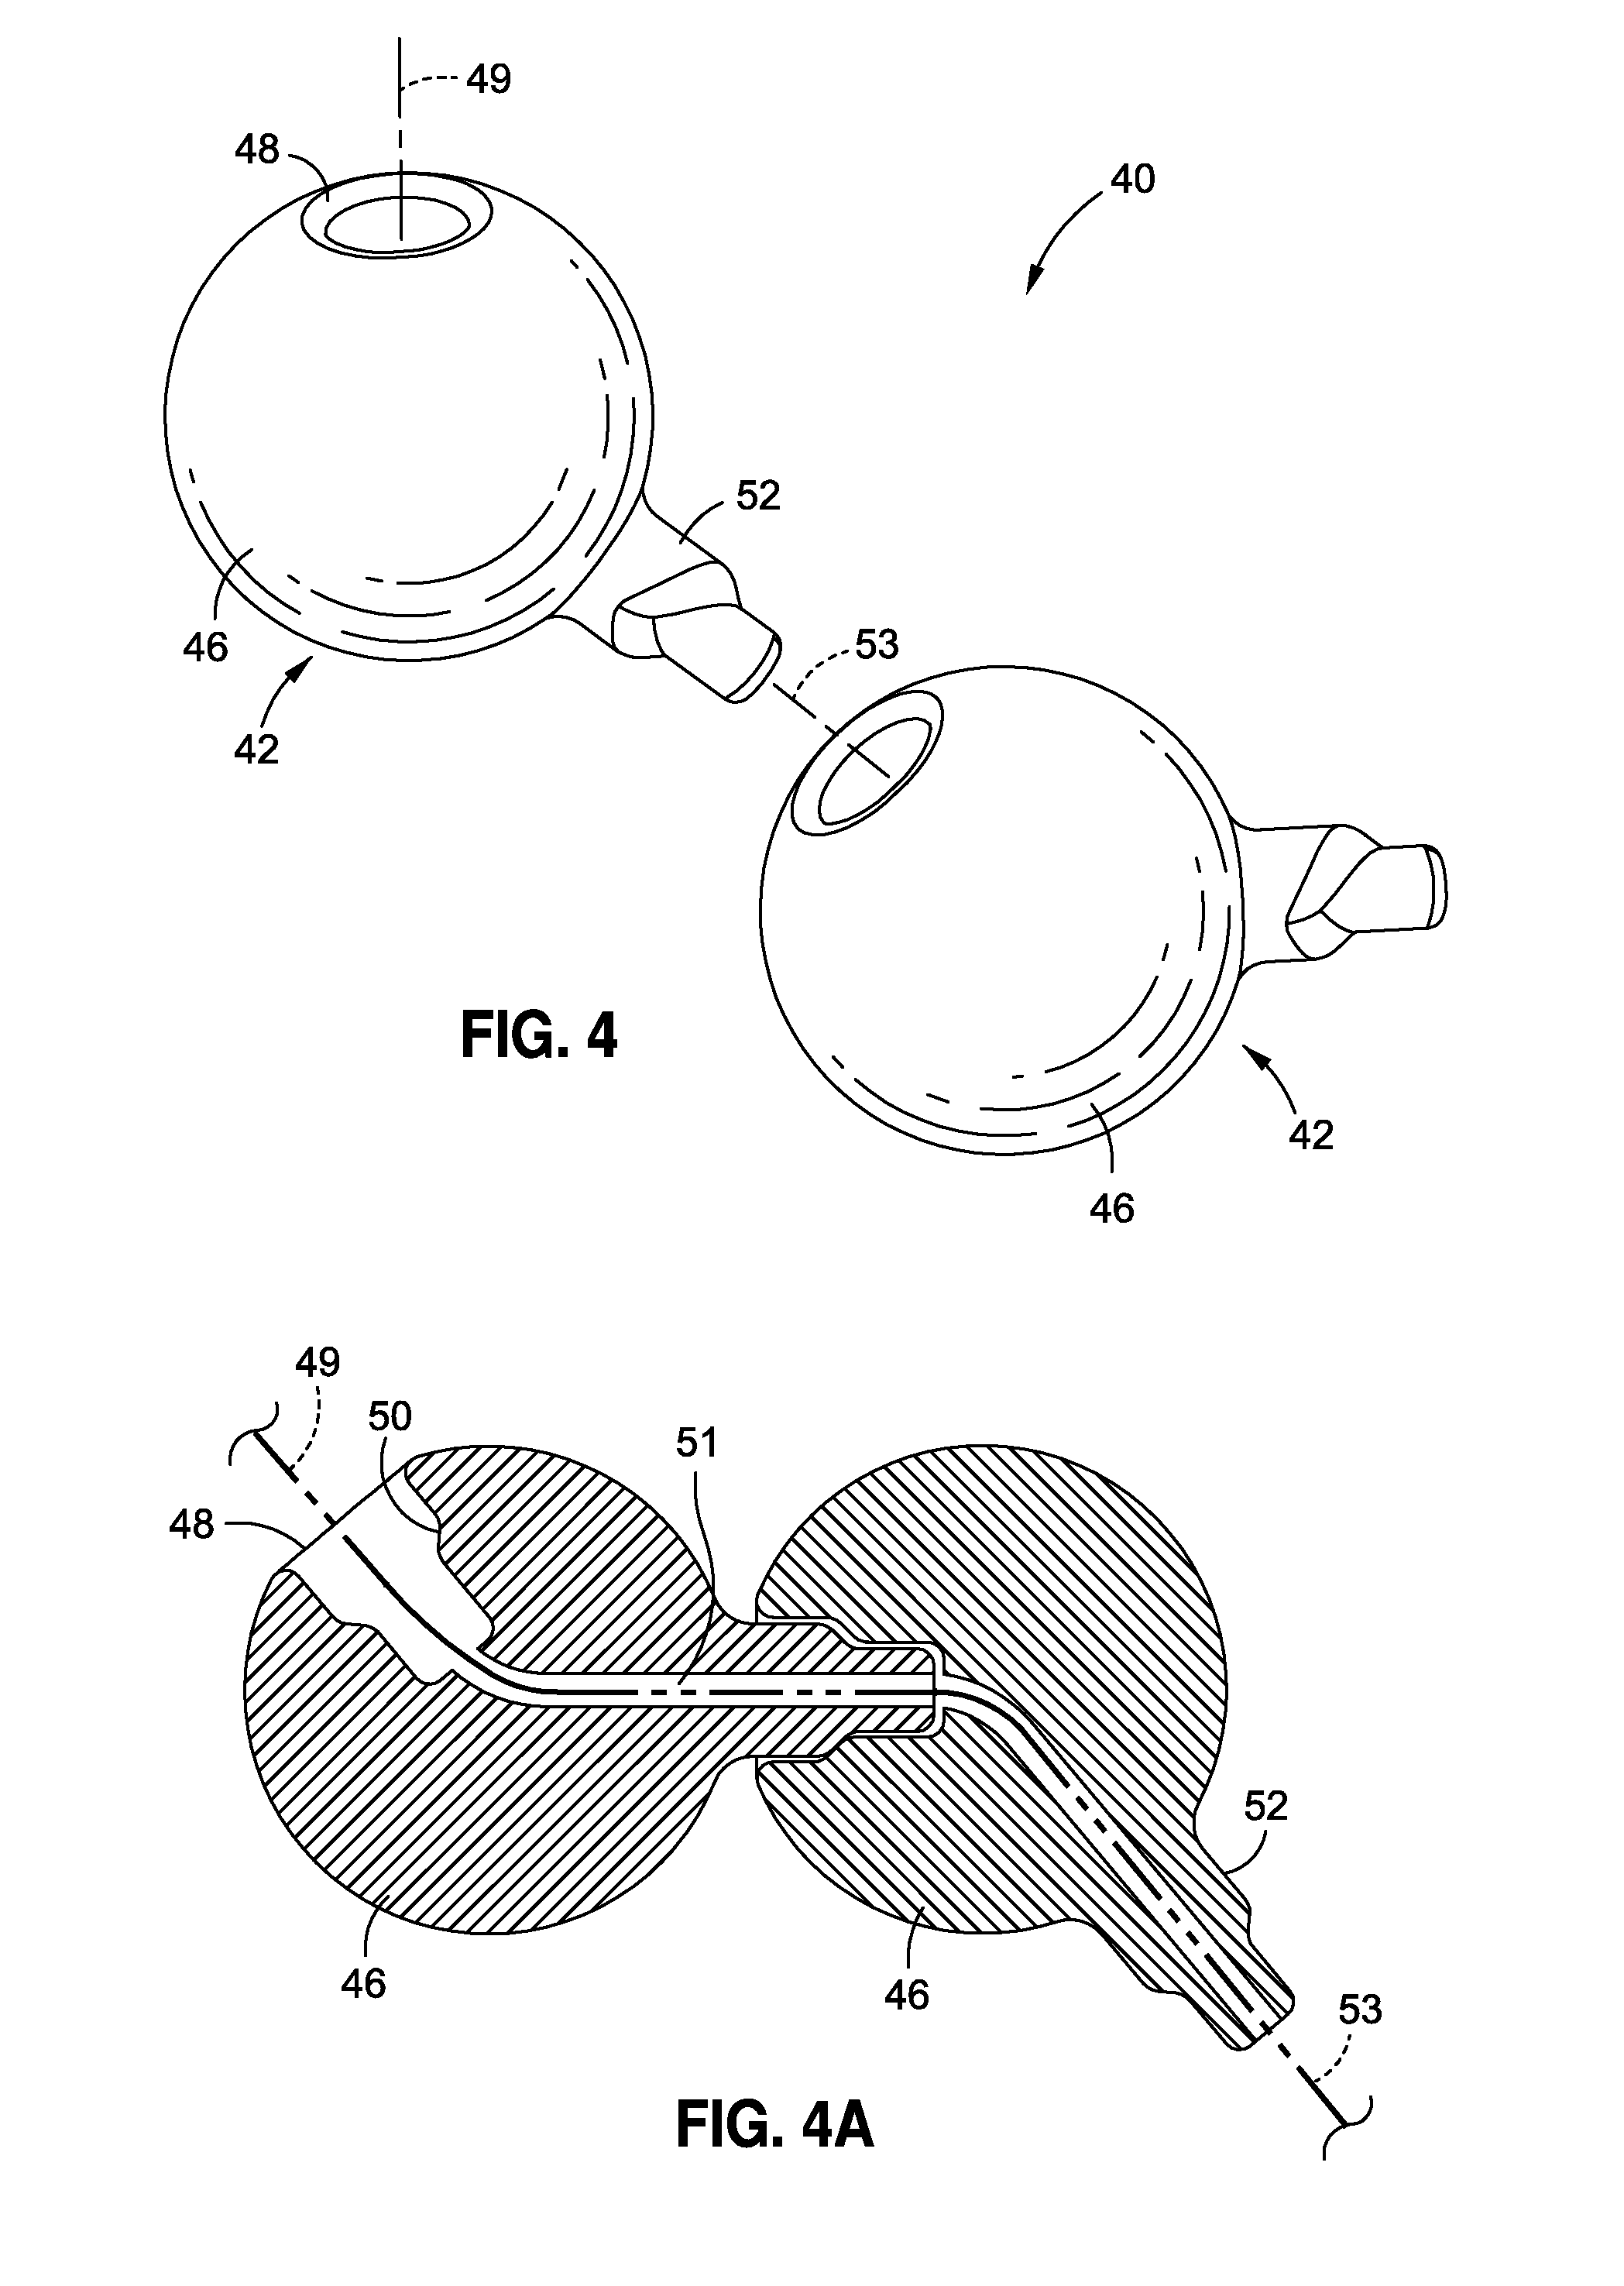 Non-inflatable gastric implants and systems